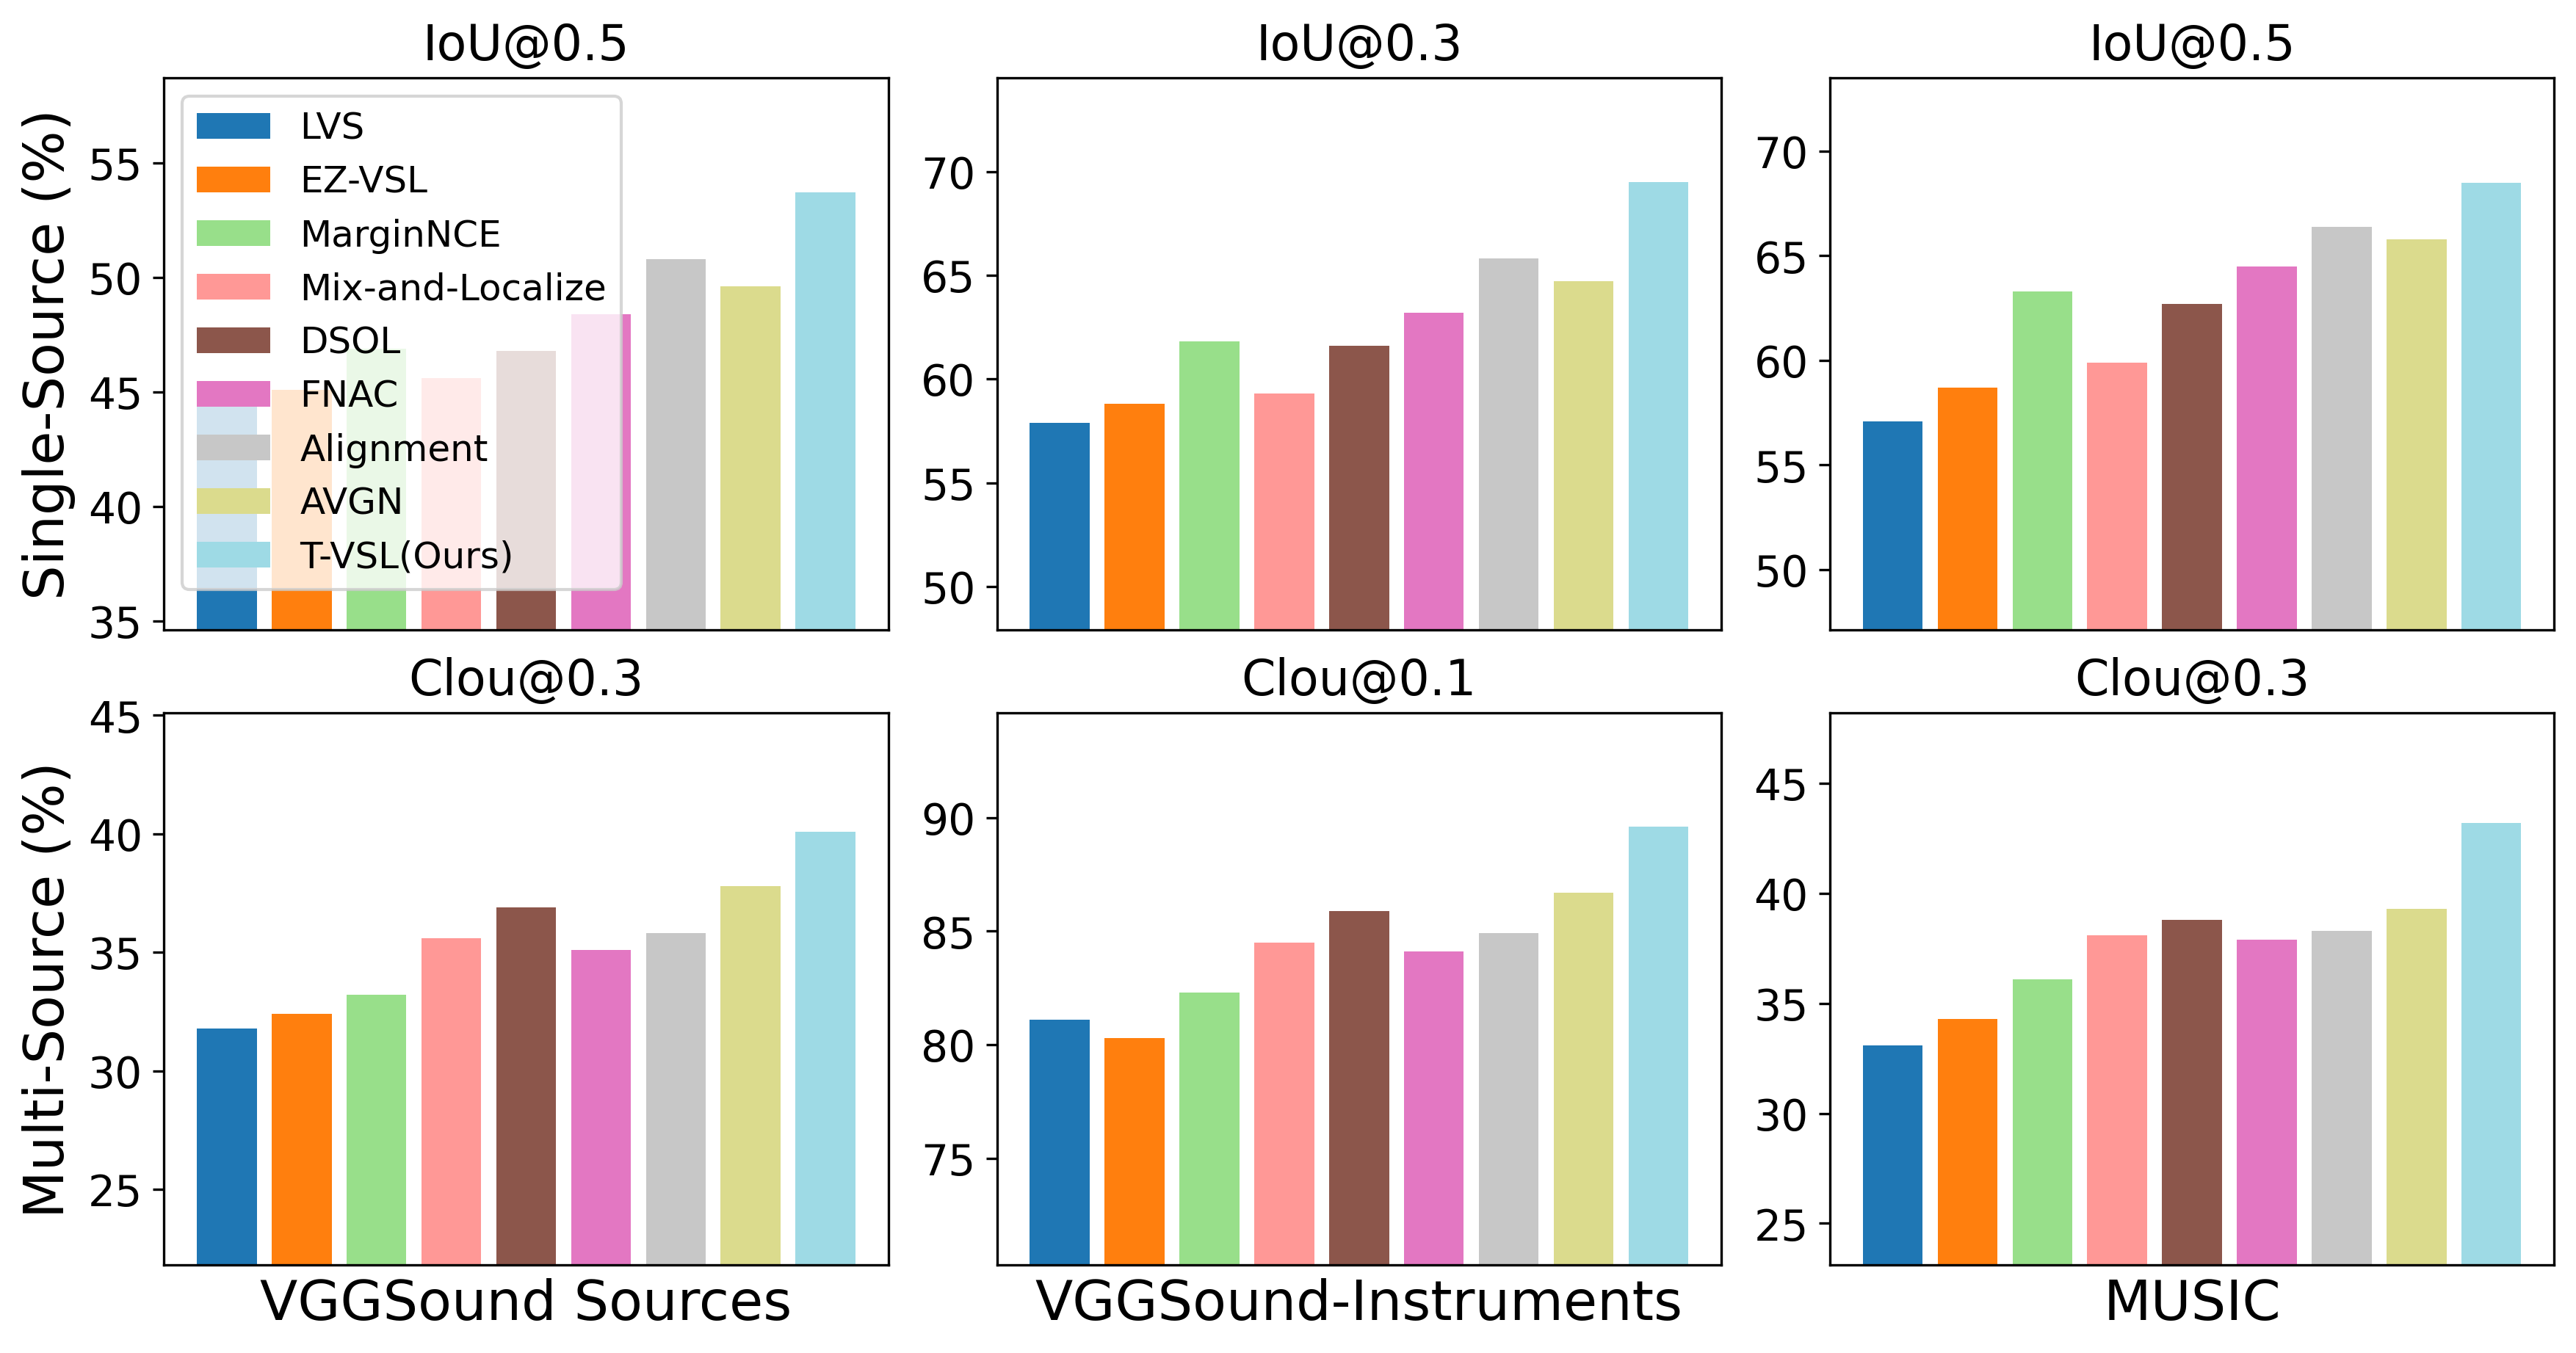 T-VSL: Text-Guided Visual Sound Source Localization in Mixtures